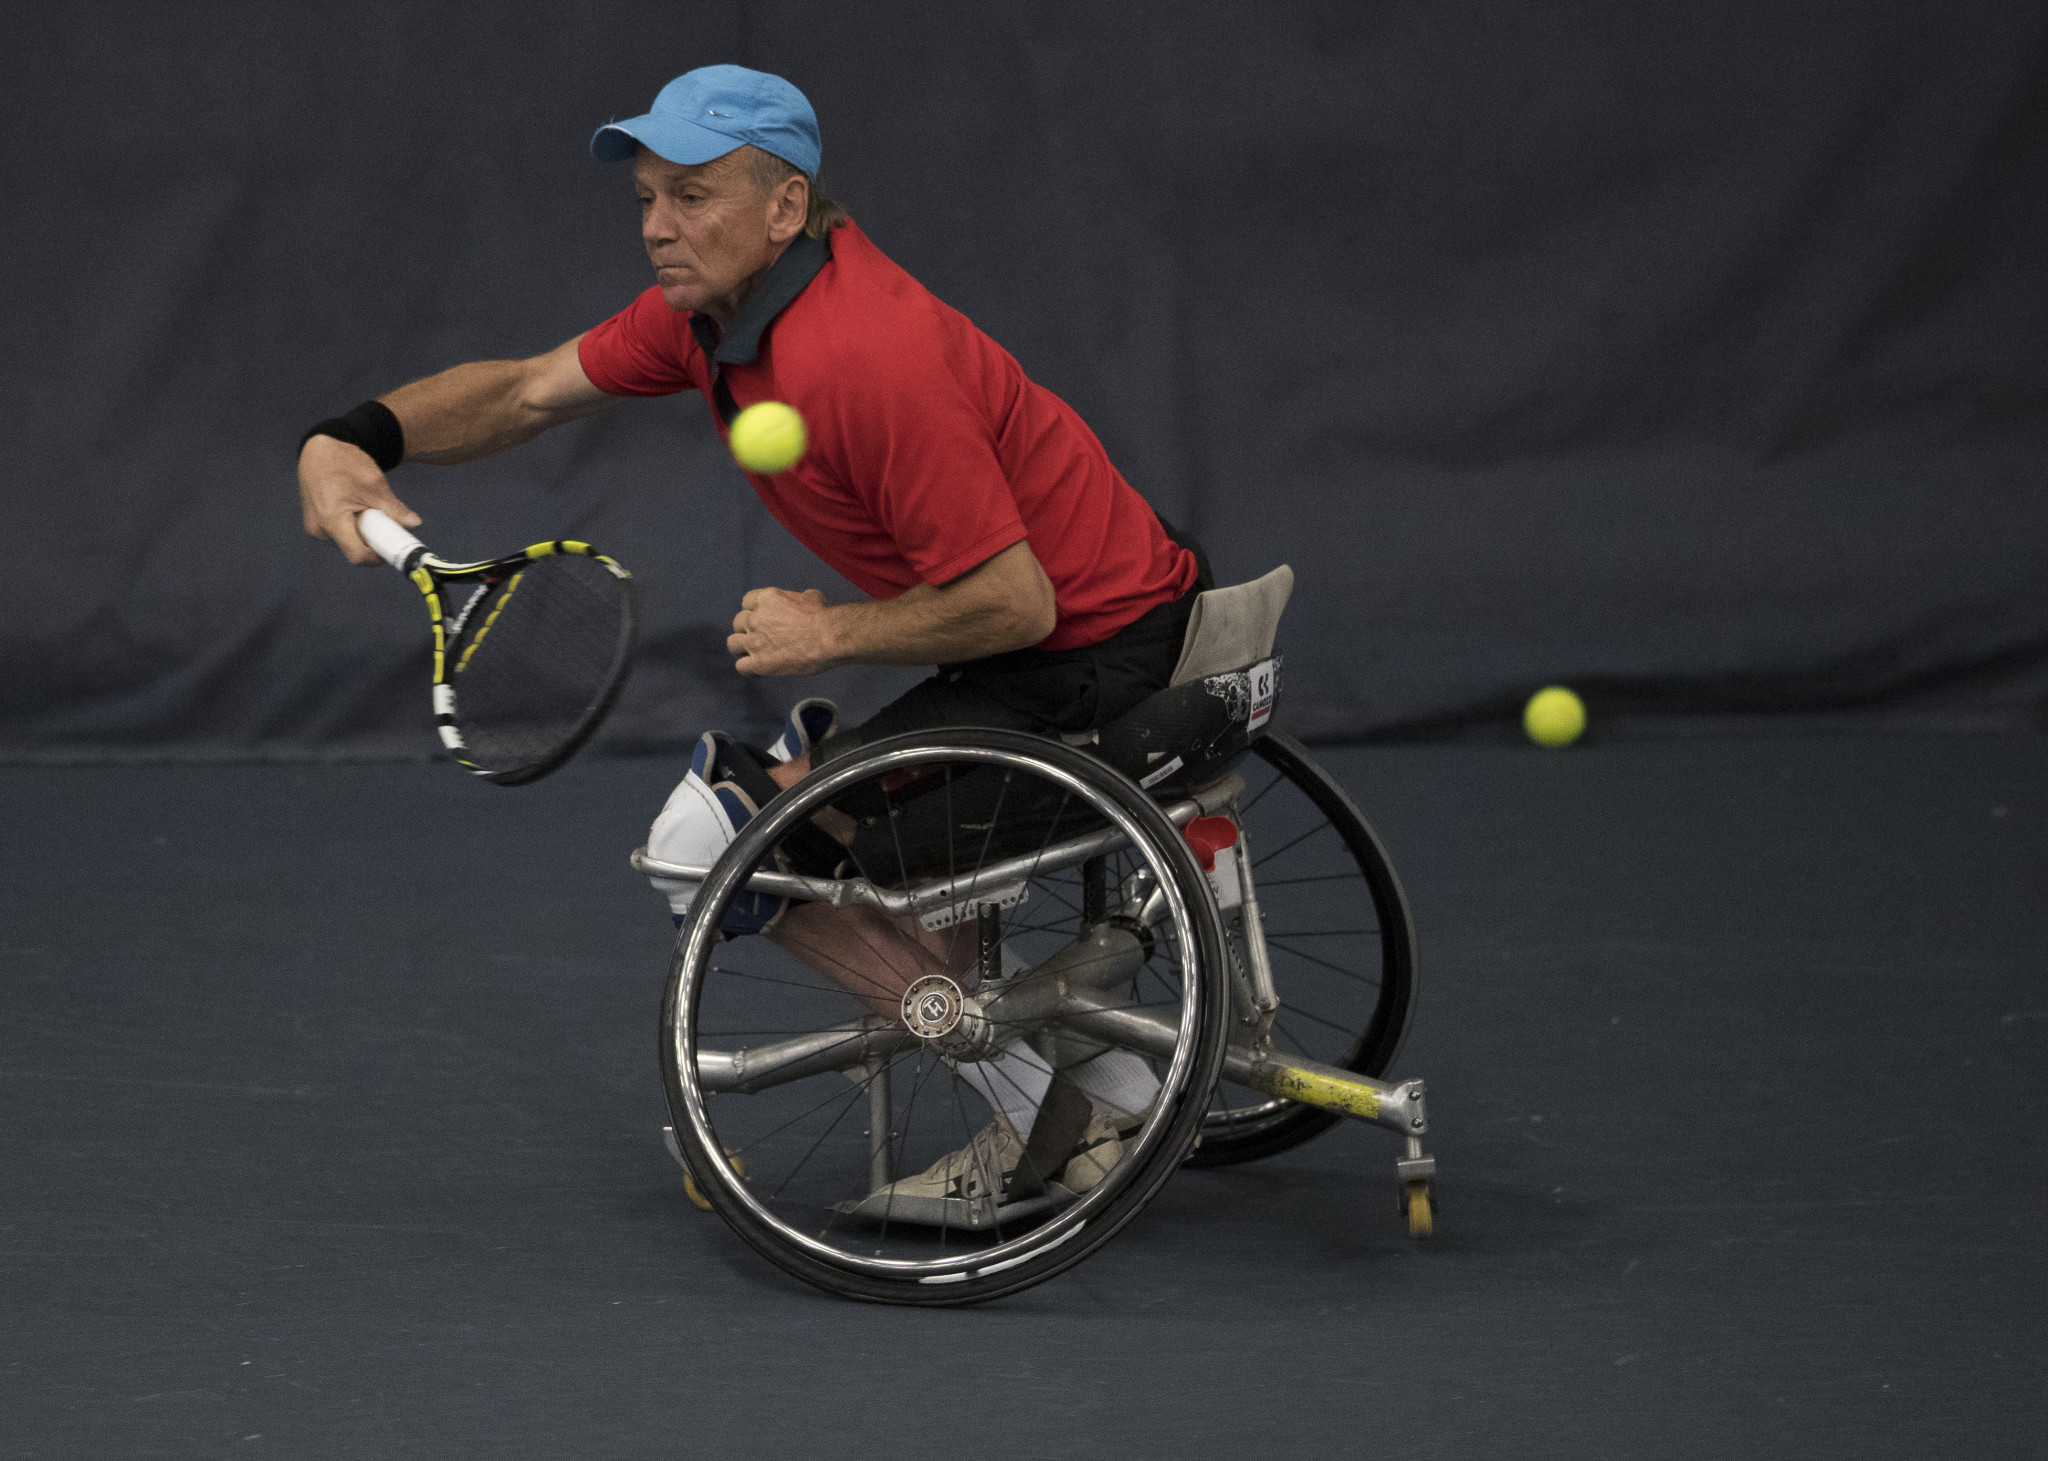 Martin Legner, pictured, contributed to Austria's 2-1 win over the United States in the men's event at the ITF Wheelchair Tennis World Team Cup in Ramat Hasharon in Israel ©Getty Images